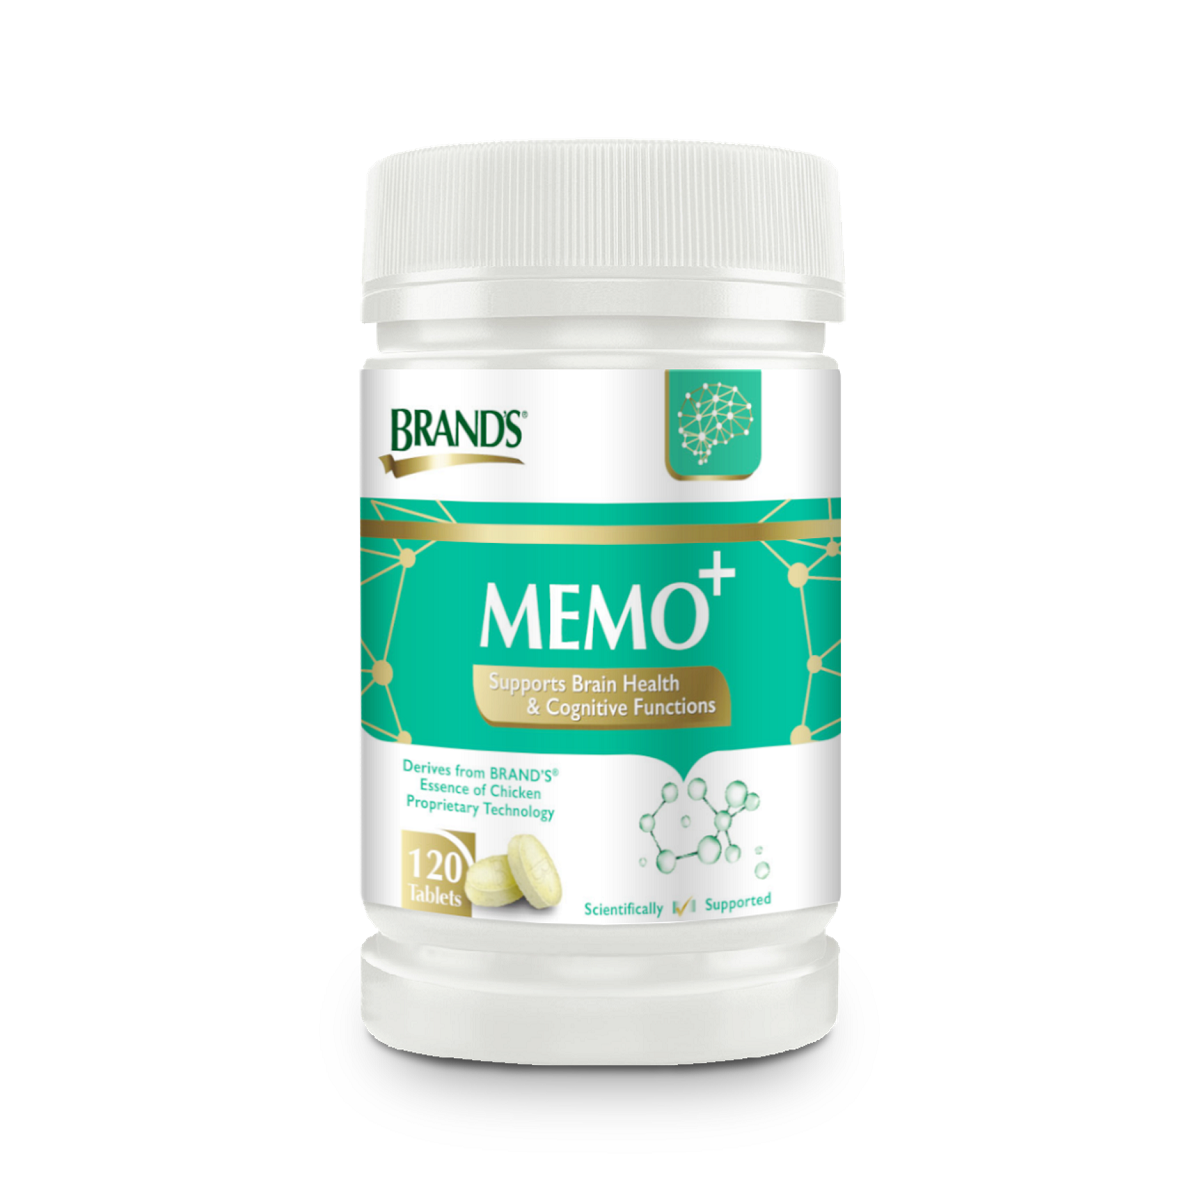 MEMO+ 120 Tablets, Products